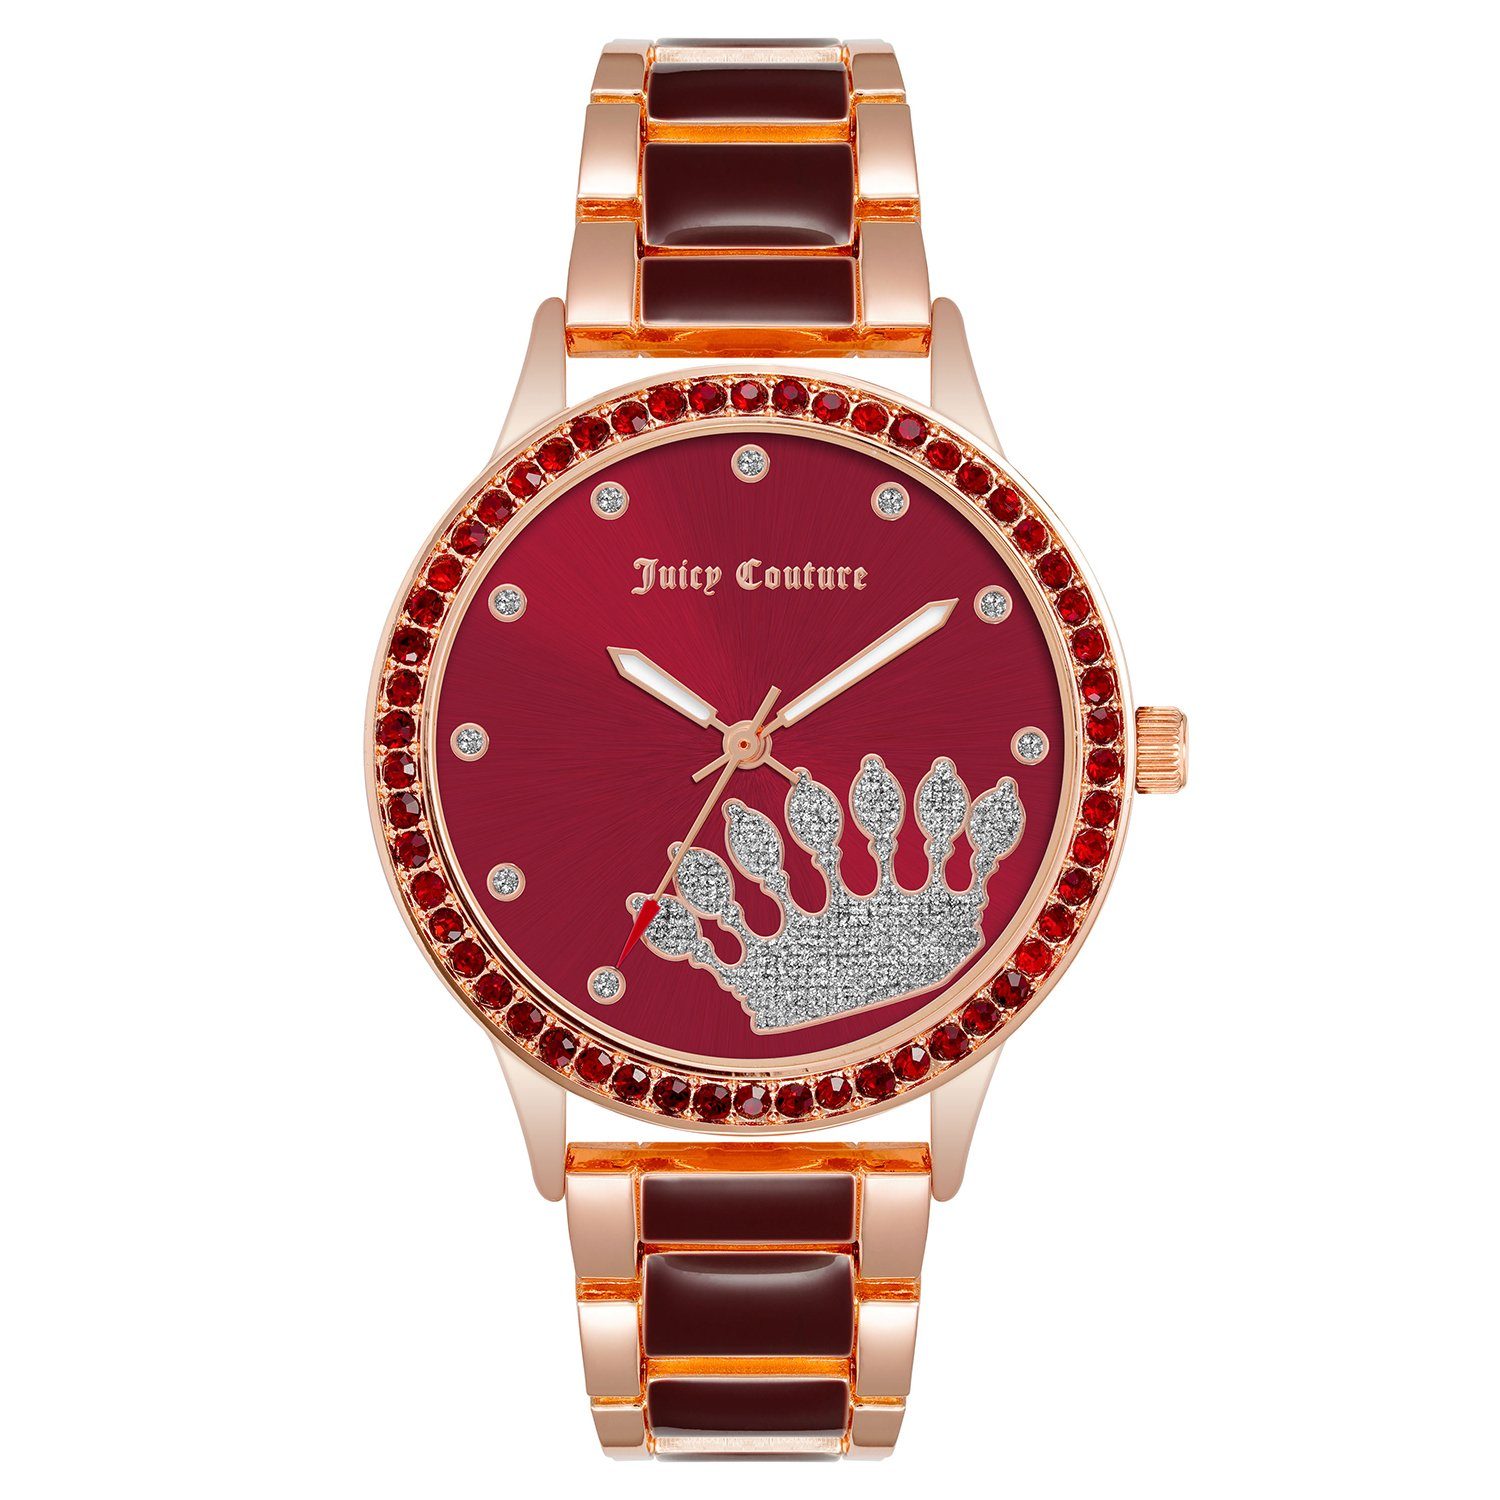 Juicy Couture Digitaluhr JC/1334RGBY